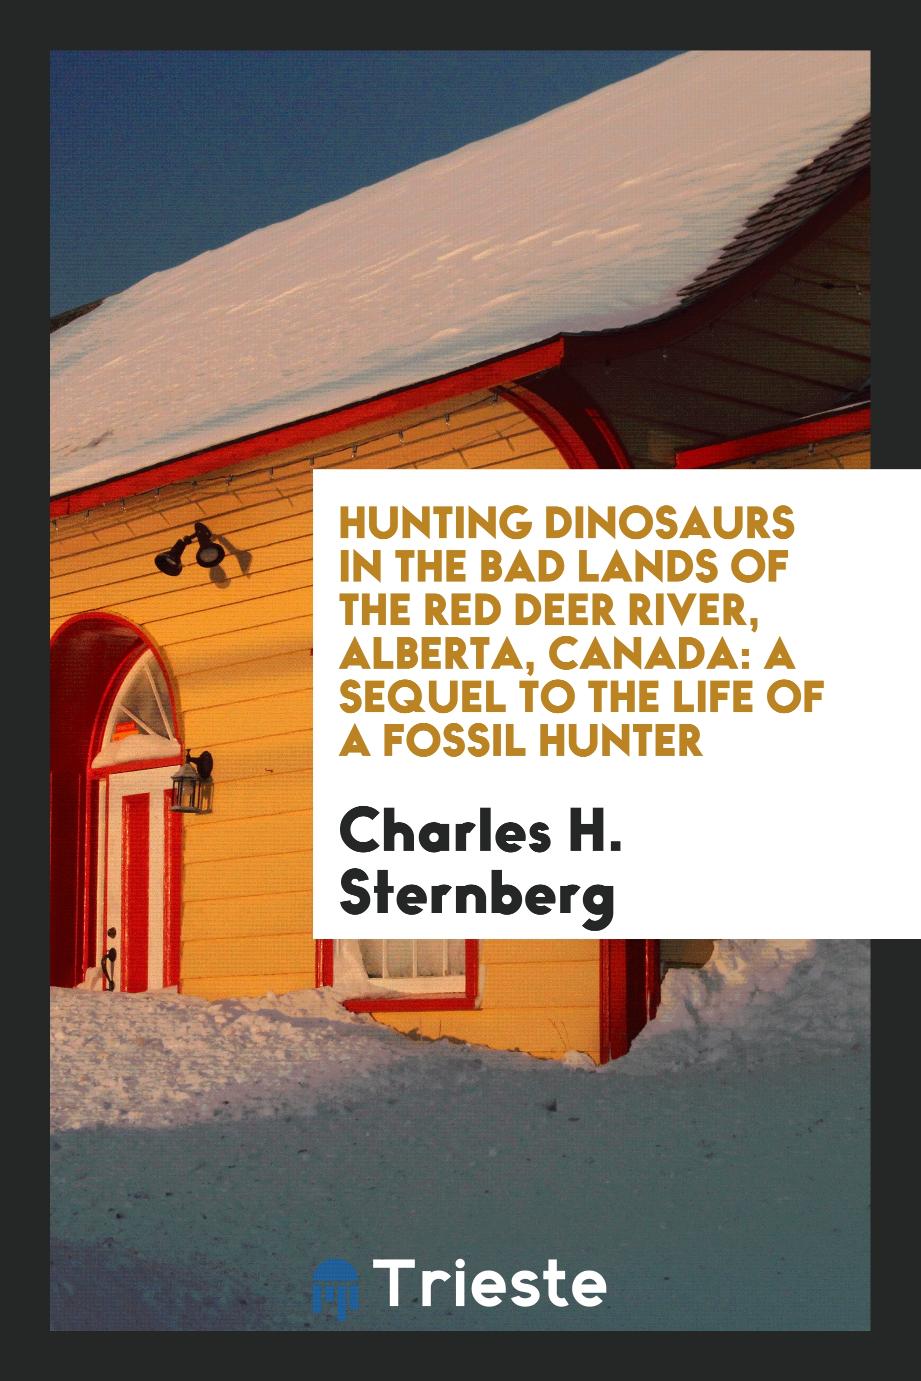 Hunting Dinosaurs in the Bad Lands of the Red Deer River, Alberta, Canada: A Sequel to the Life of a Fossil Hunter